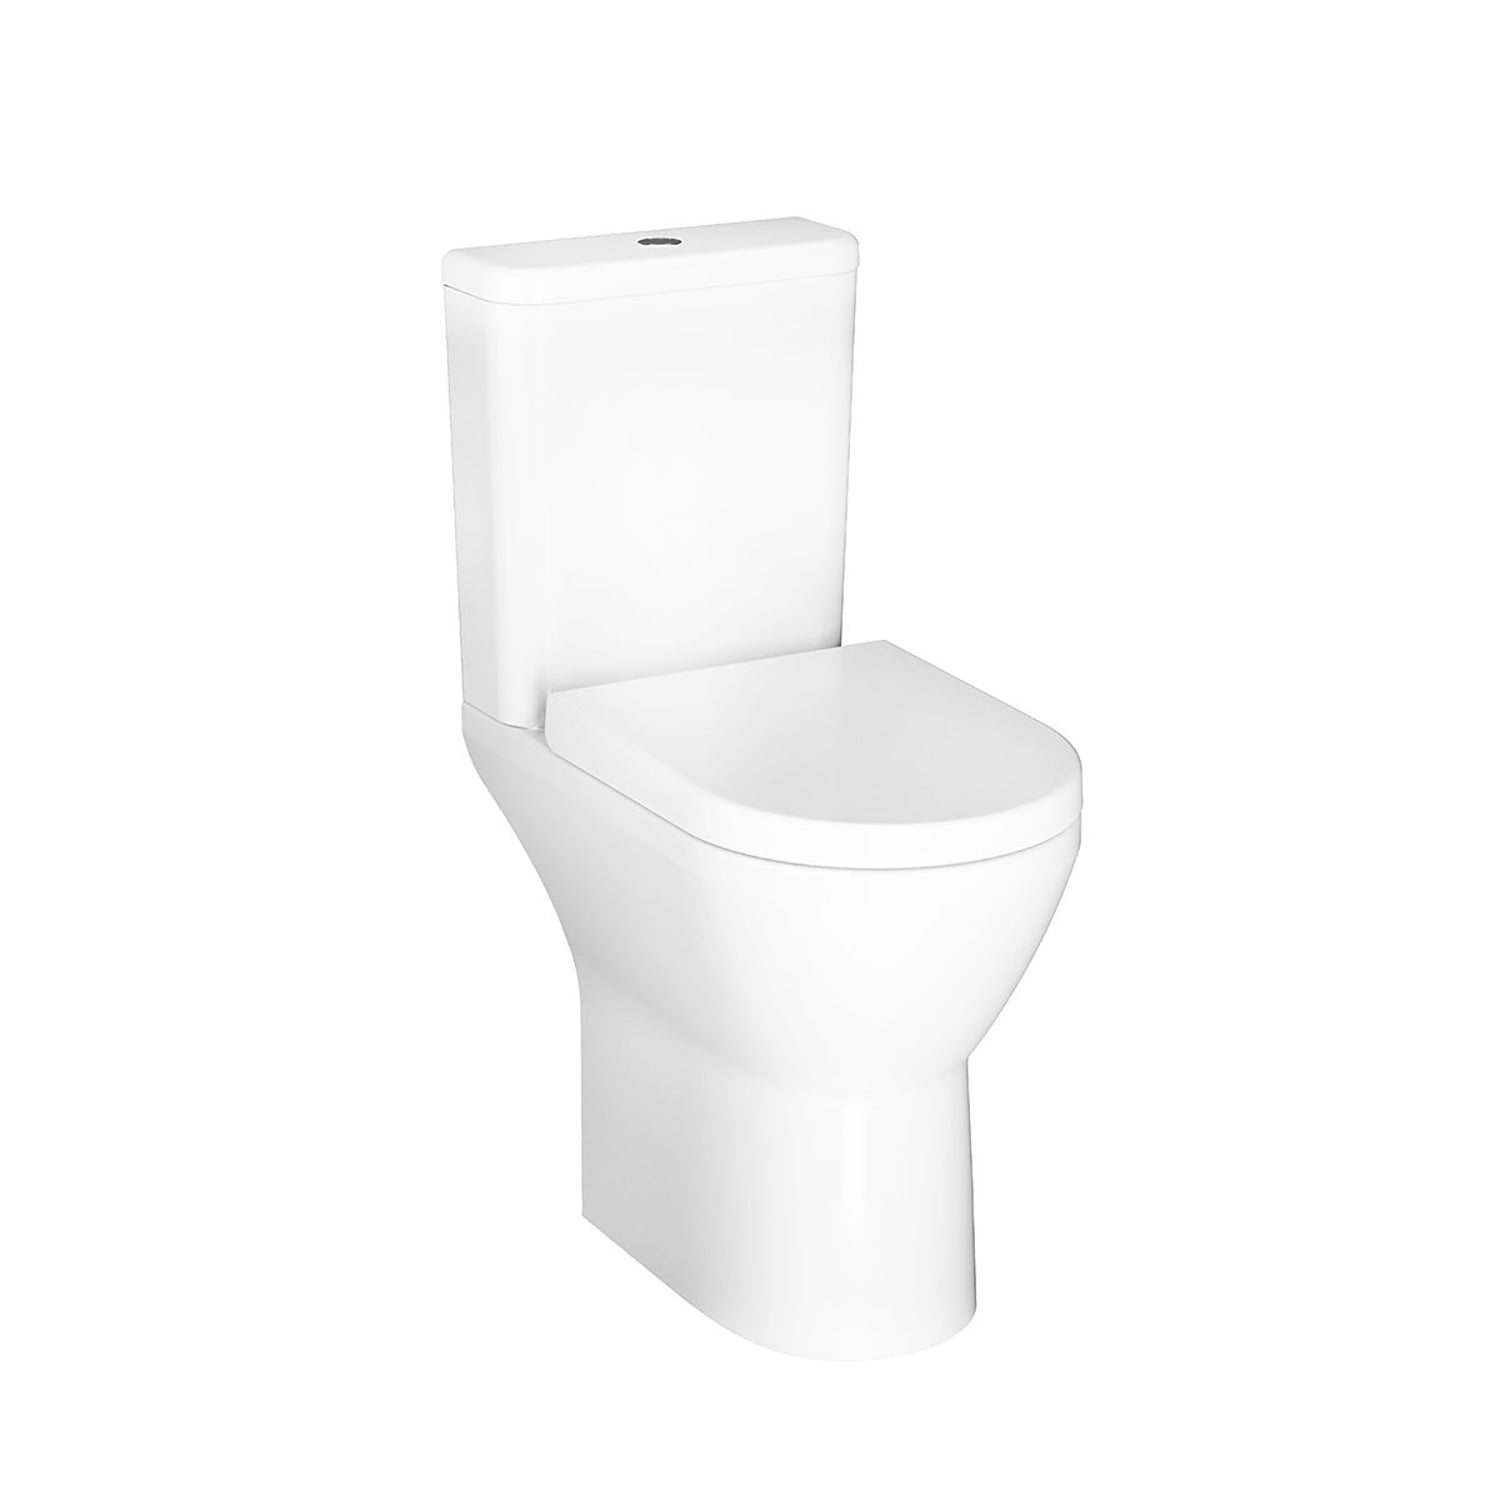 Vesta comfort height close coupled toilet in a white finish, 500mm with seat included on a white background.